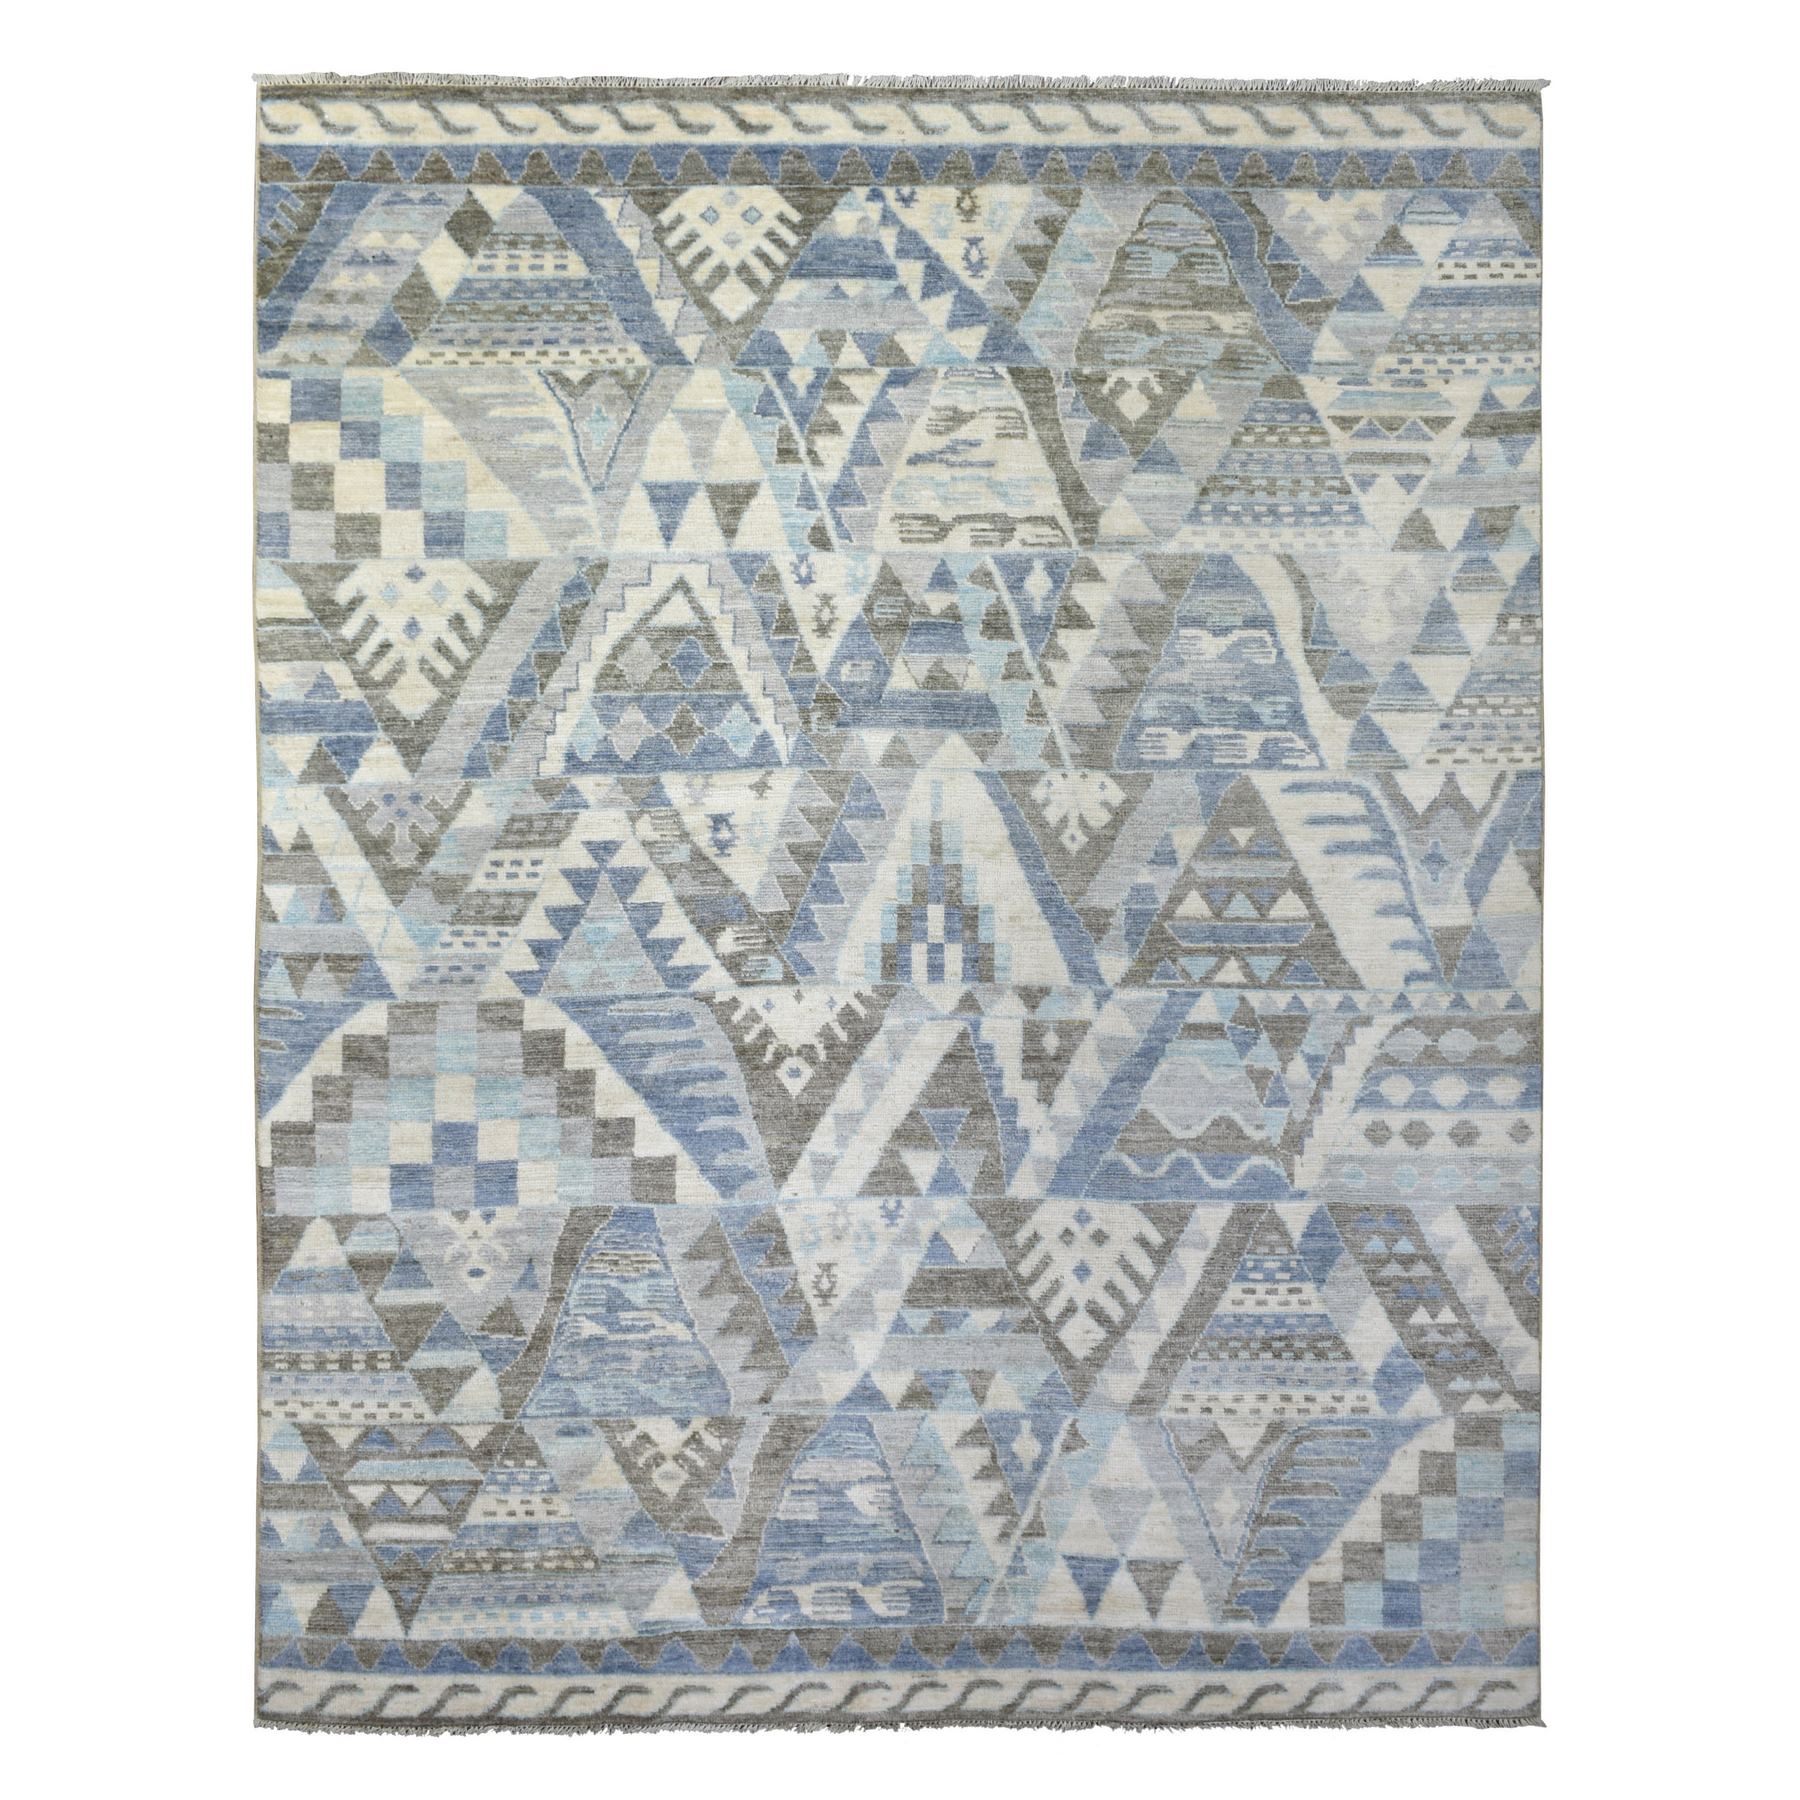 8'x10' Ivory, Hand Woven Anatolian Design with Little Triangles, Natural Dyes Pure Wool, Oriental Rug 